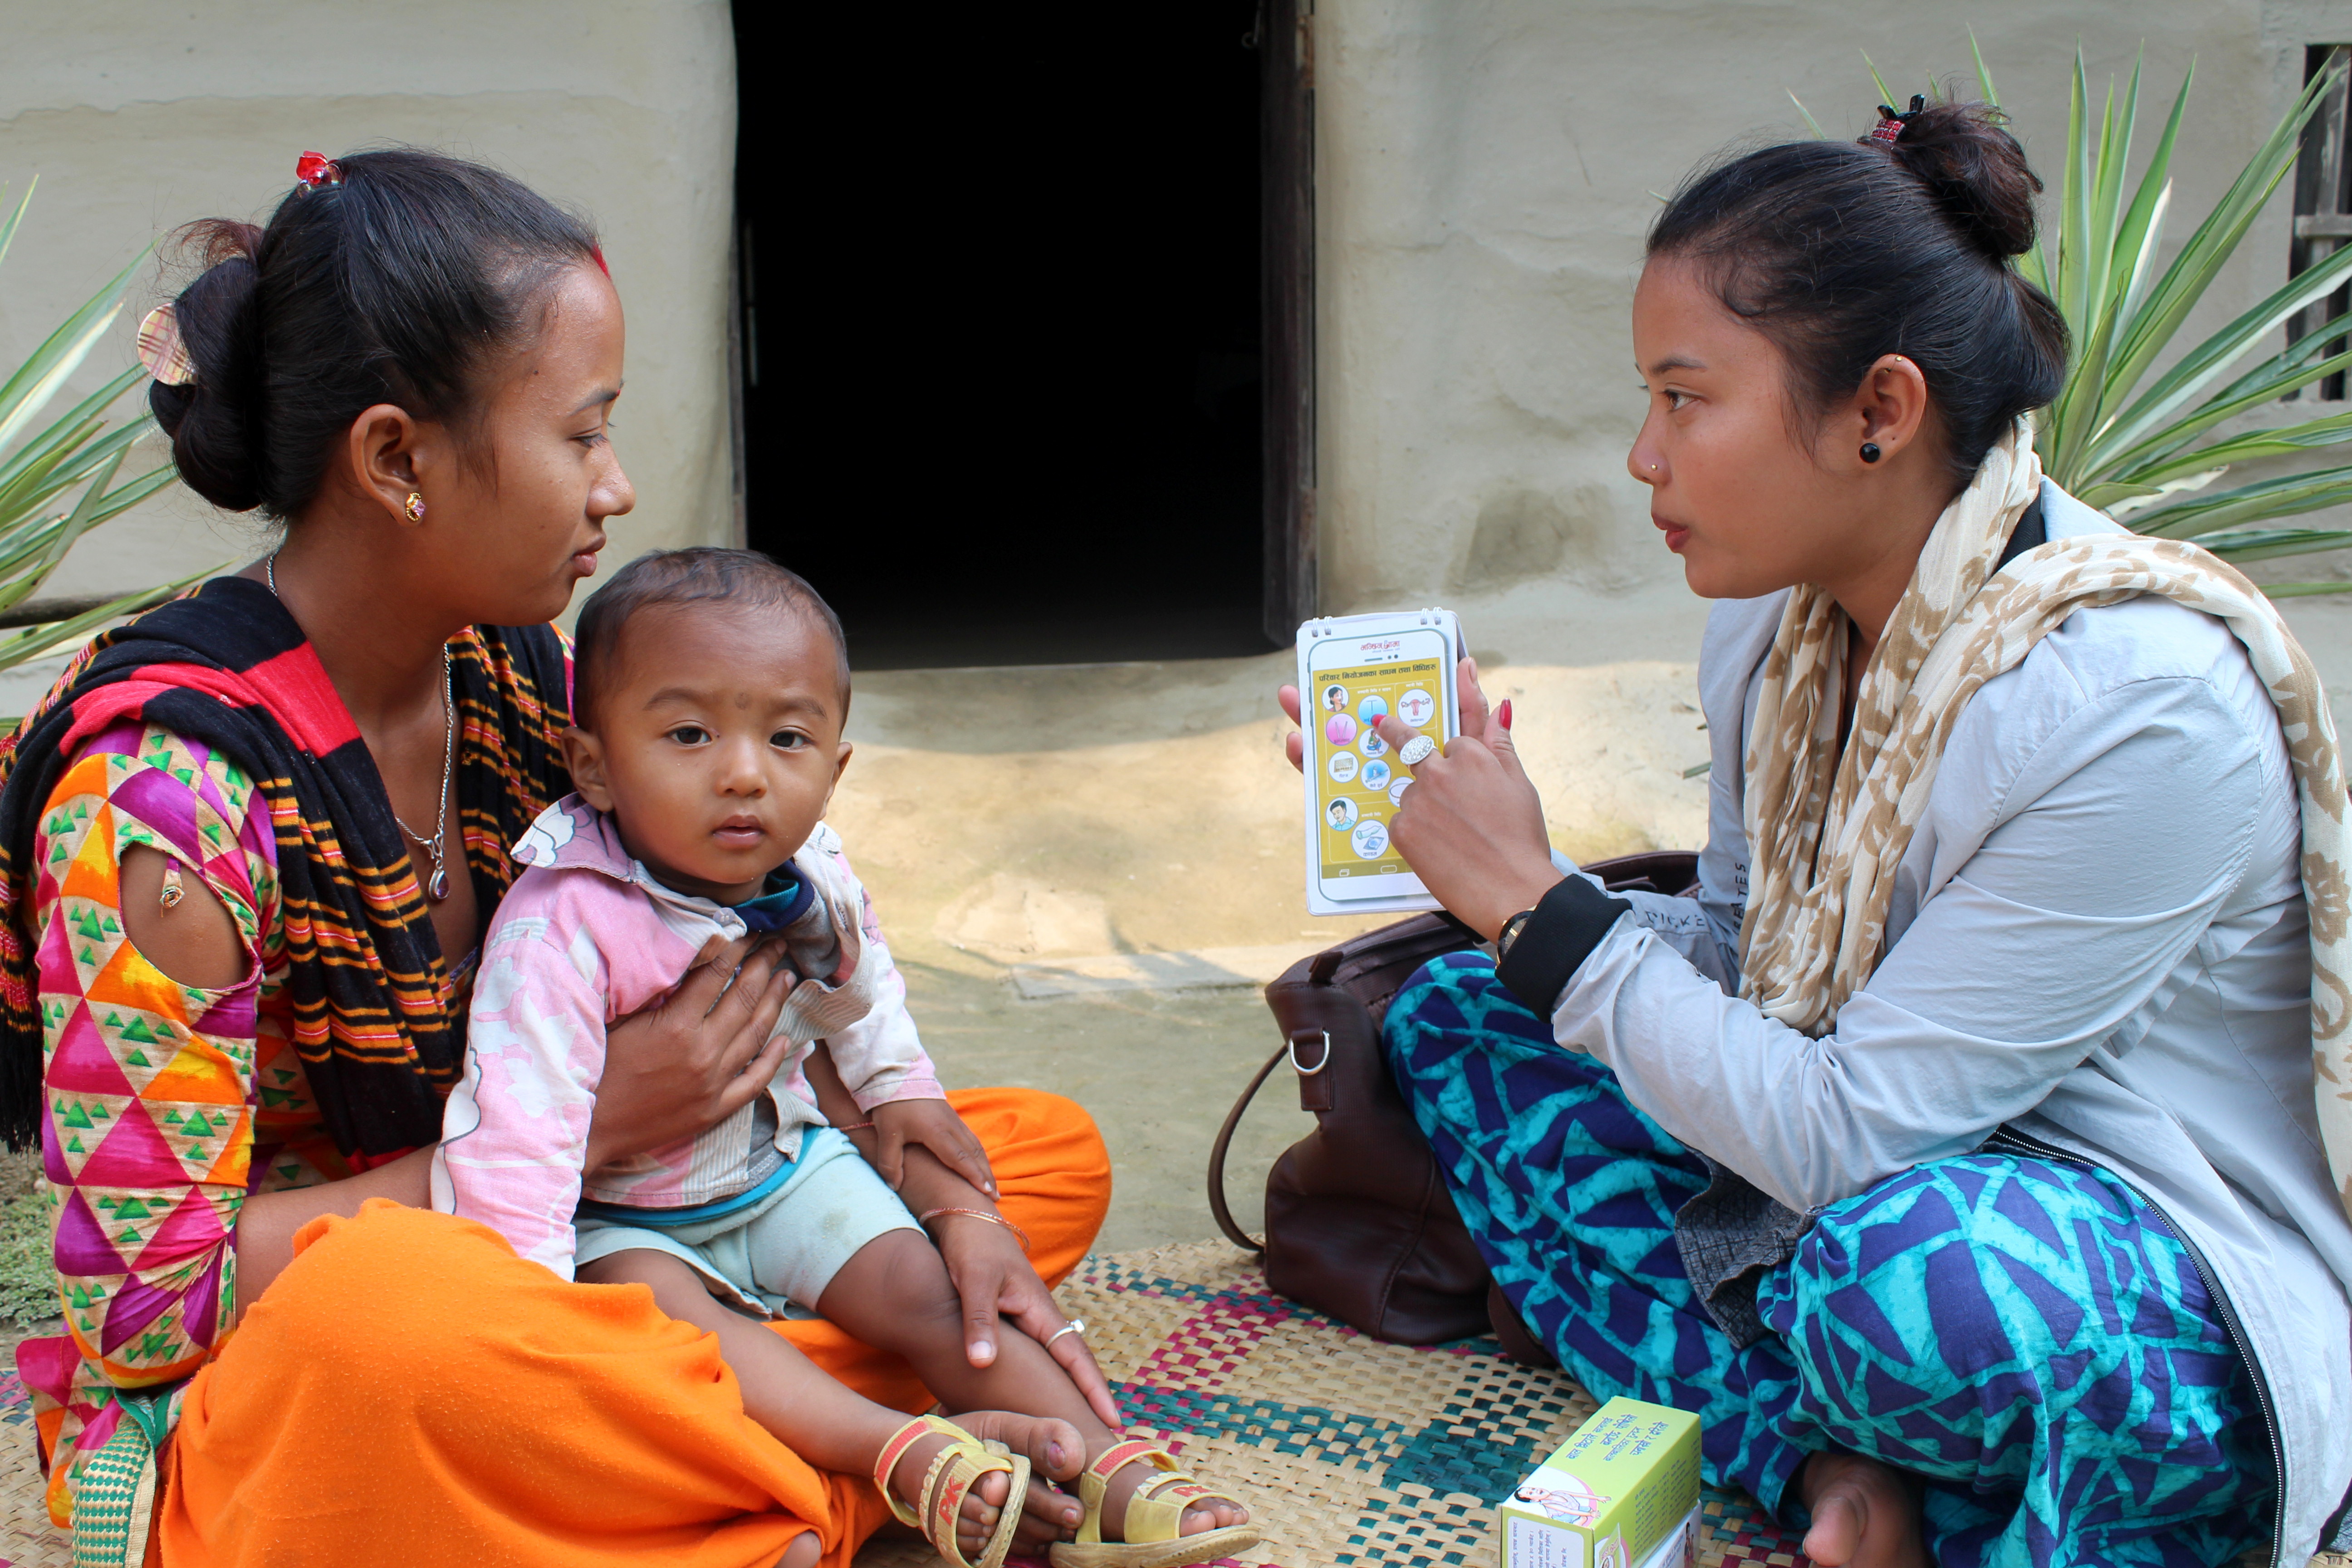 Counselling on family planning is part of a holistic approach to maternal health and nutrition